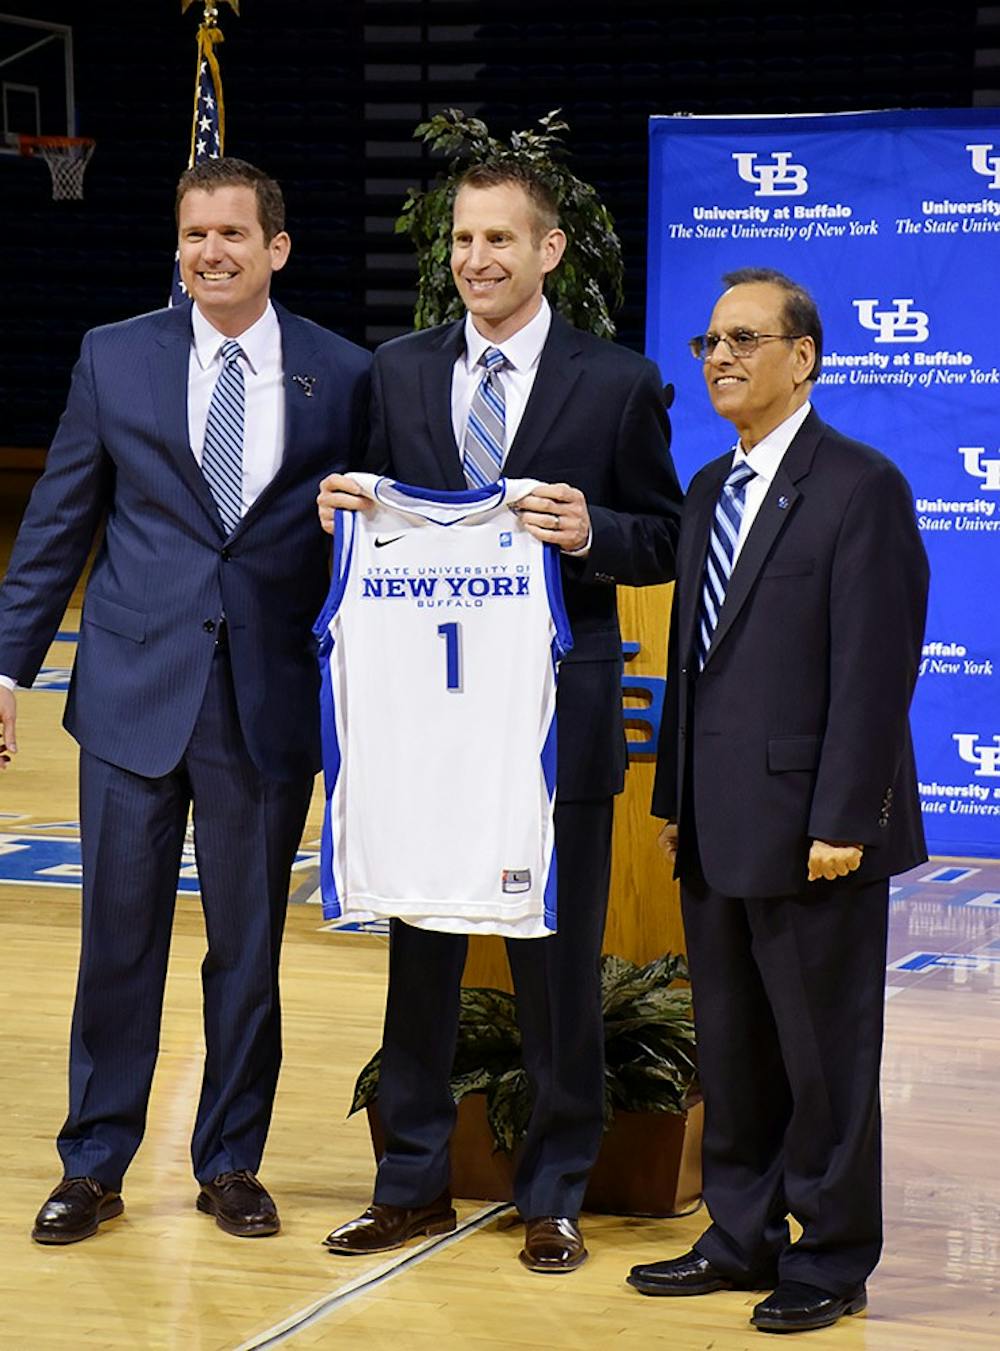 <p>New men's basketball head coach Nate Oats (center) poses with Athletic Director Danny White (left) and President Satish Tripathi (right) at Monday's introductory press conference. Oats, who replaced Bobby Hurley, named his three assistant coaches on Thursday.</p>